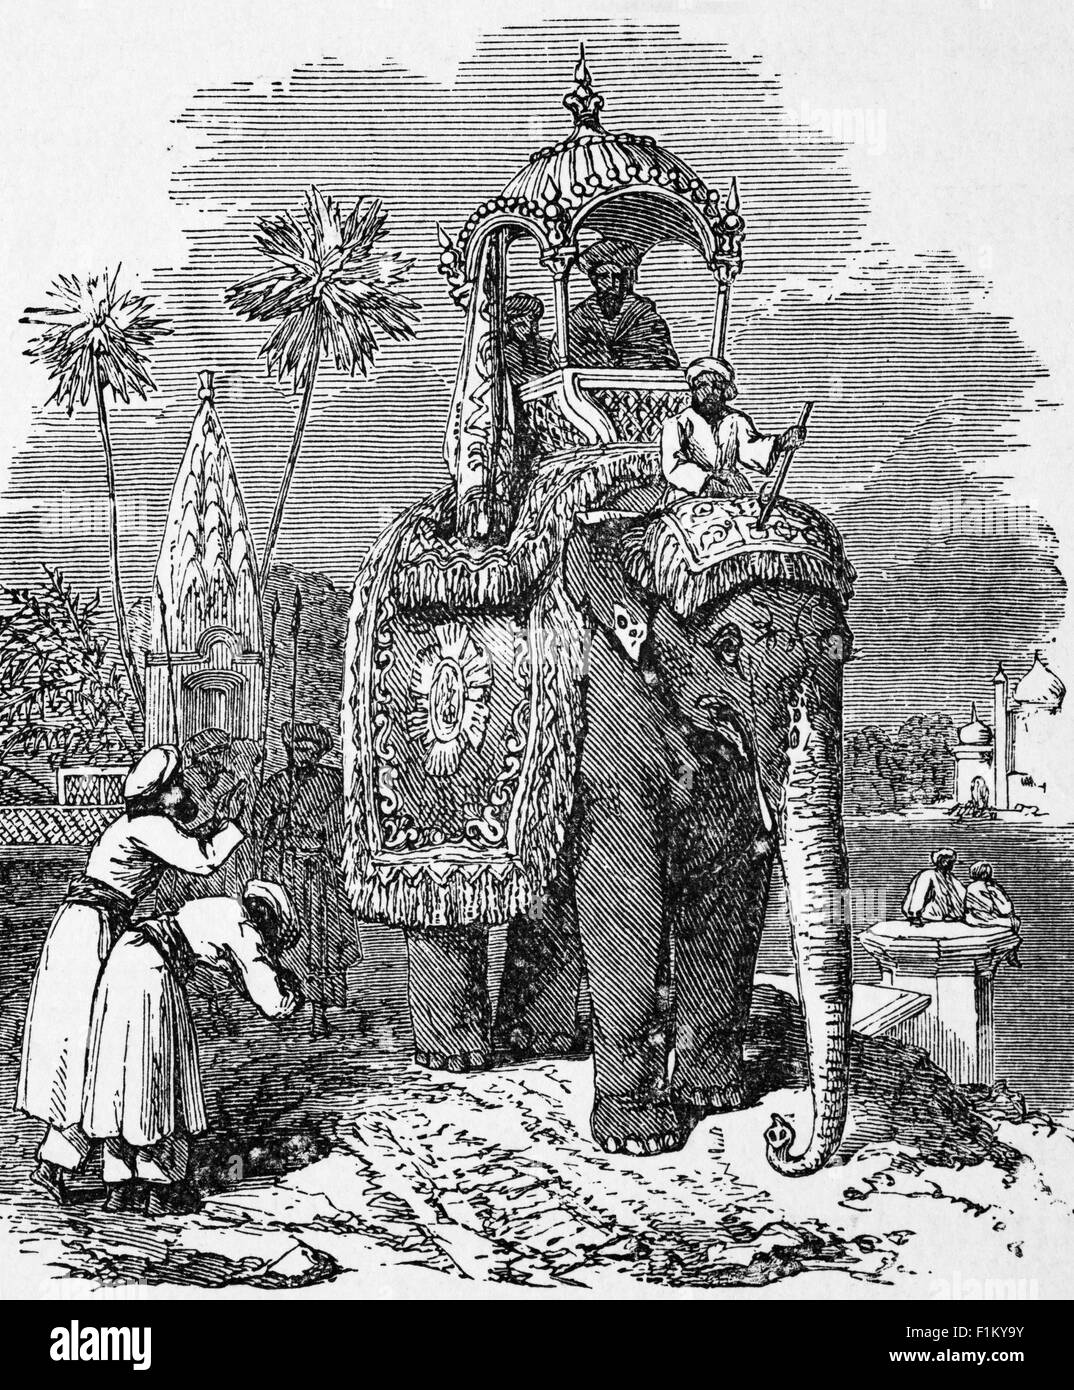 A 19th Century view of an Elephant with A Howdah, a seat for riding on the back of an elephant or camel, typically with a canopy and accommodating two or more people, India Stock Photo